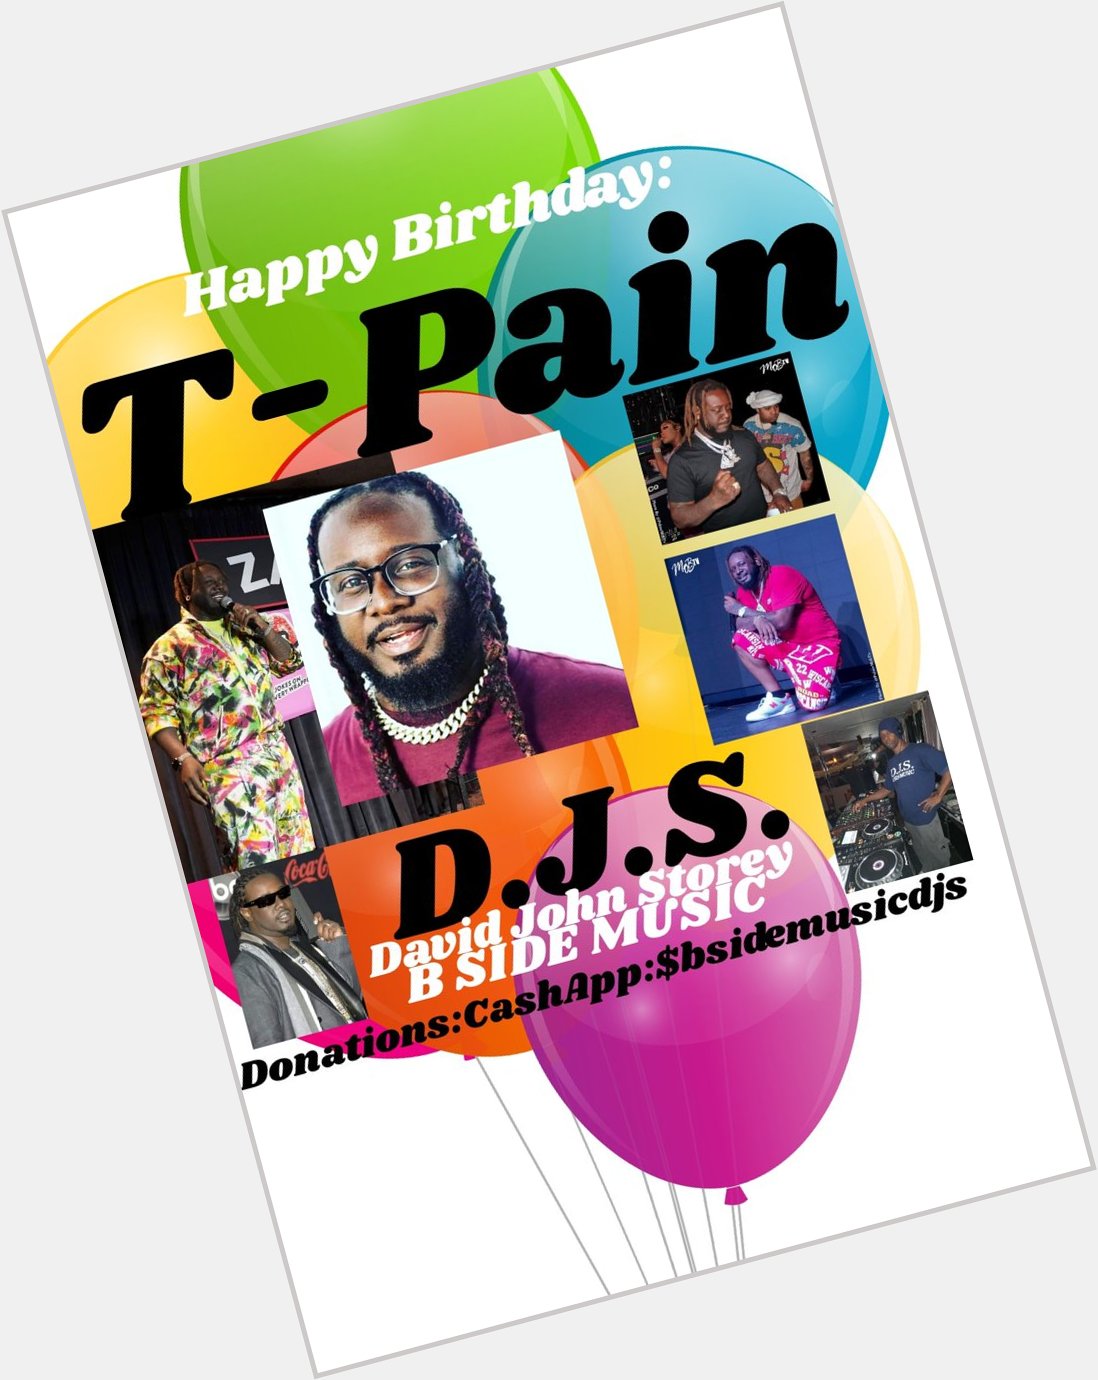 I(D.J.S.) saying Happy Birthday to Singer: \"T-PAIN\"!!! 